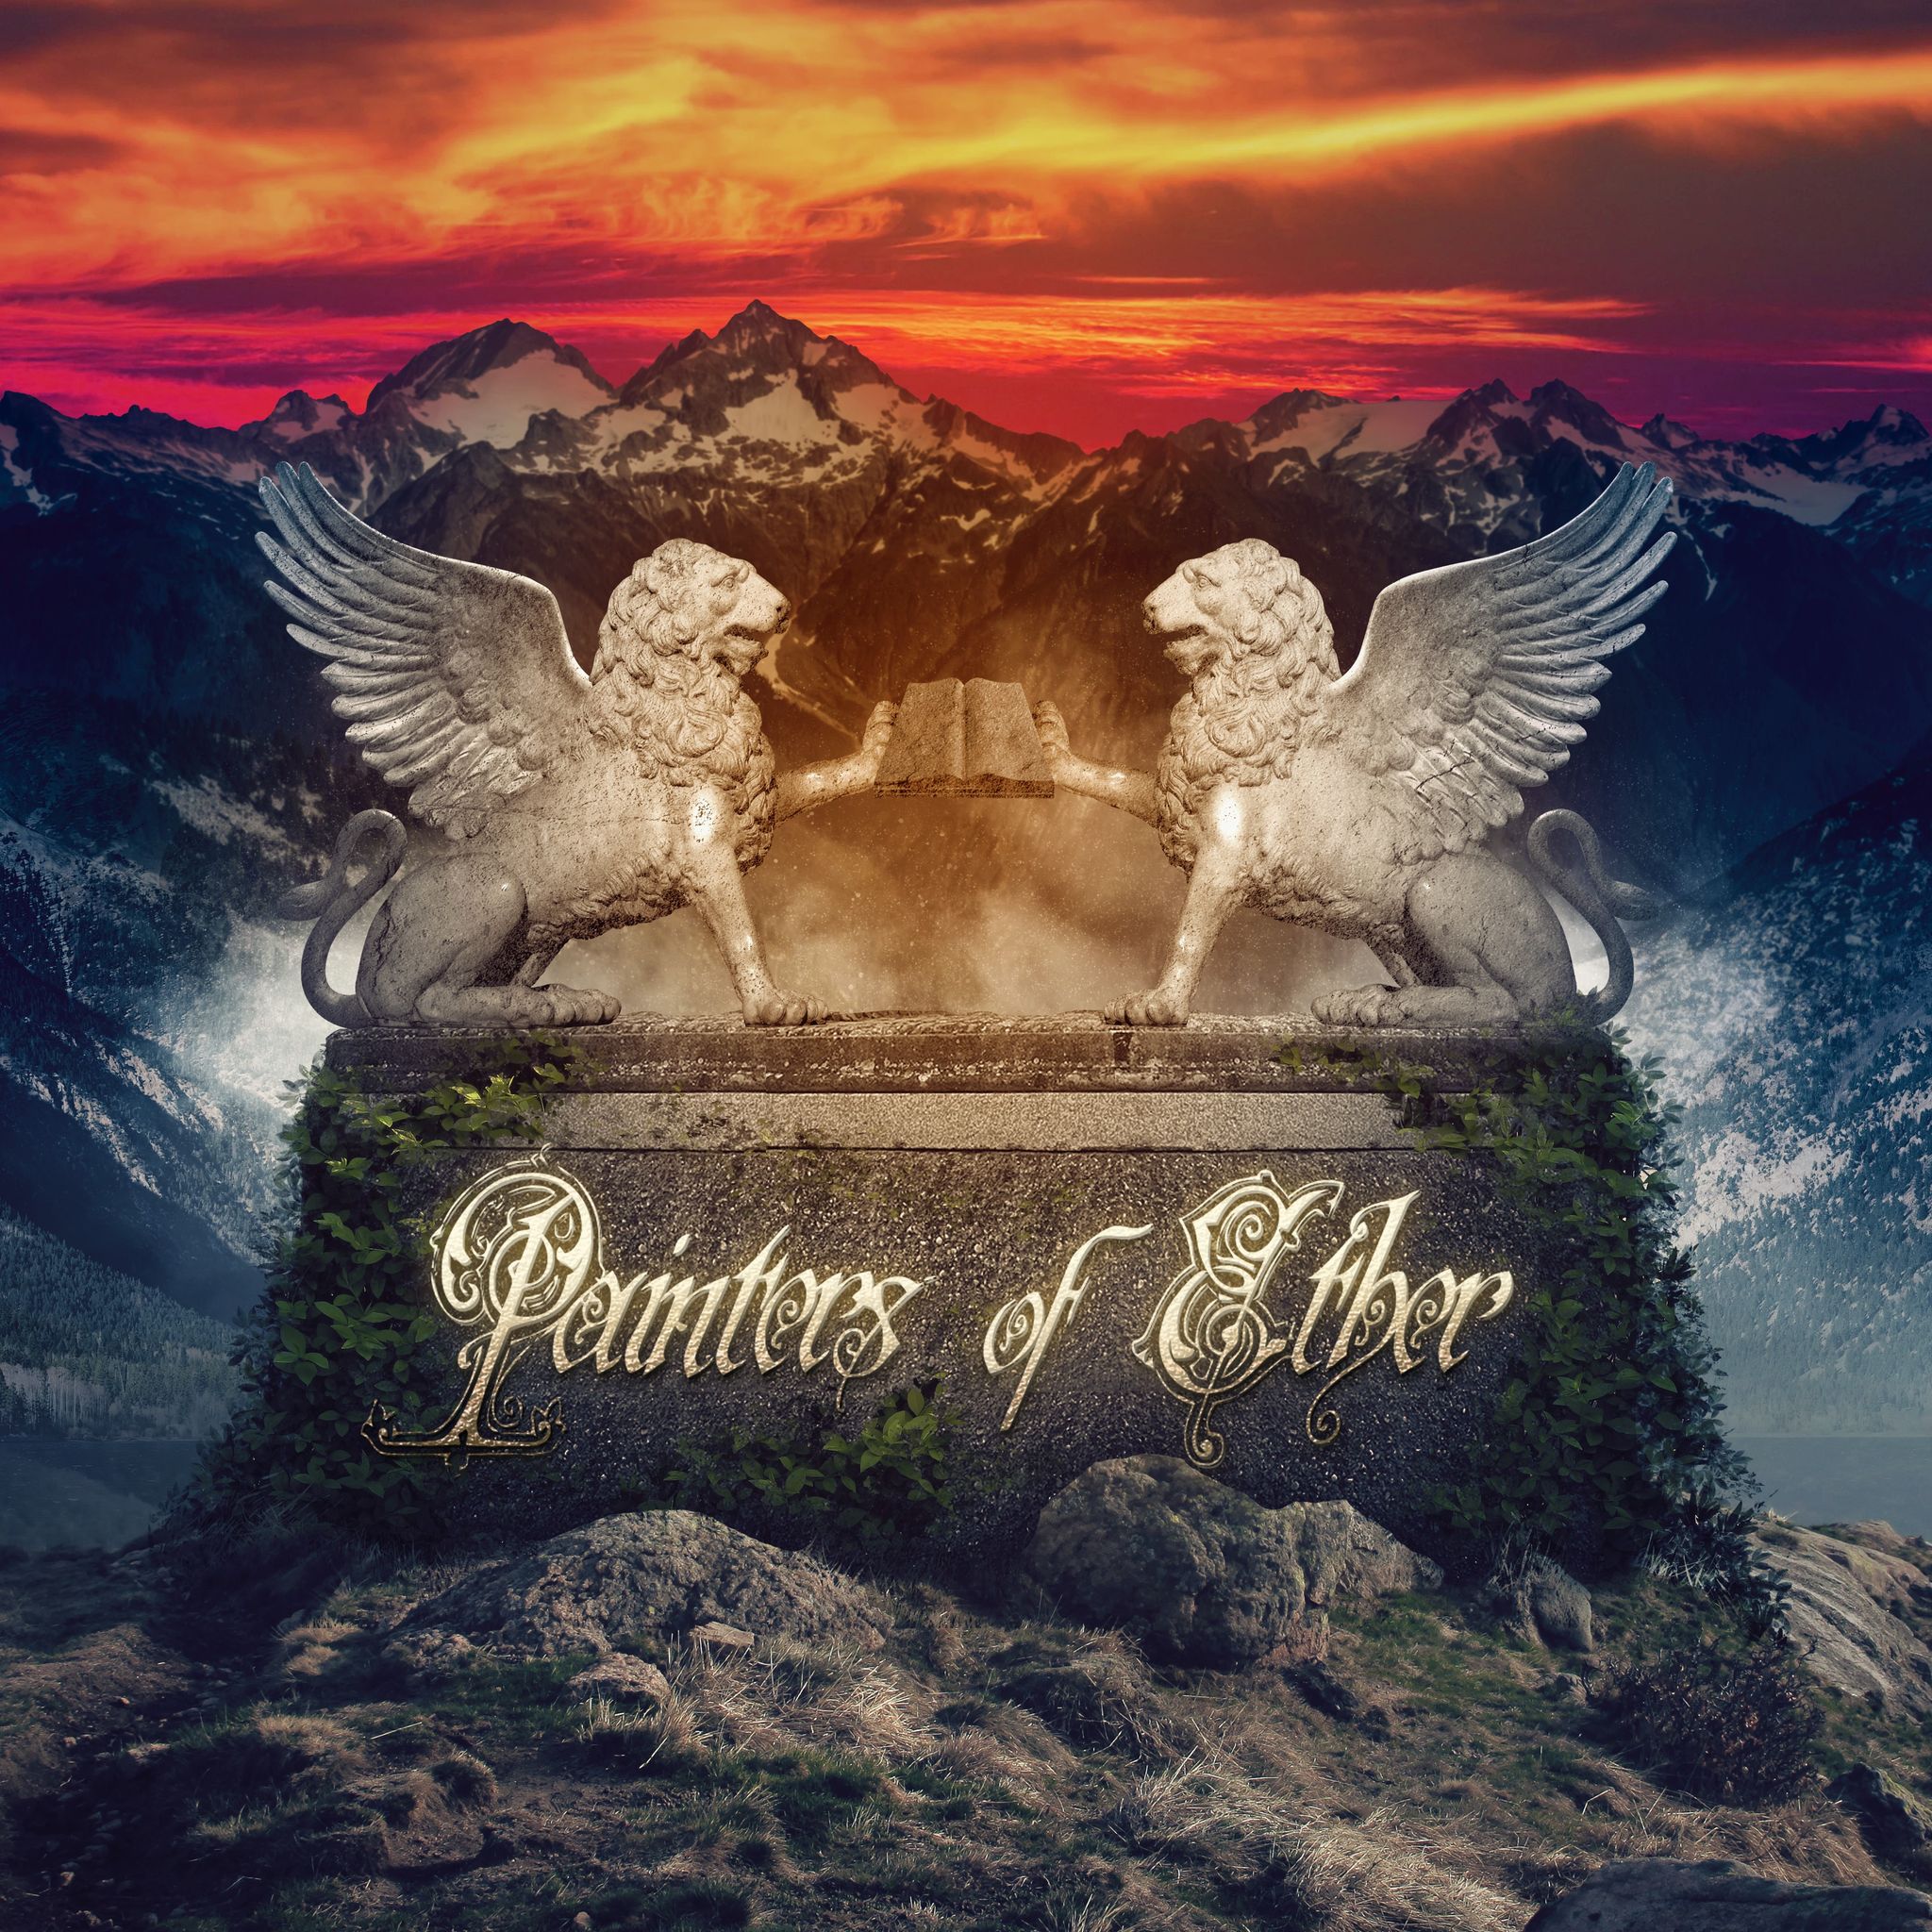 Luciano Launius – “Painters Of Ether”